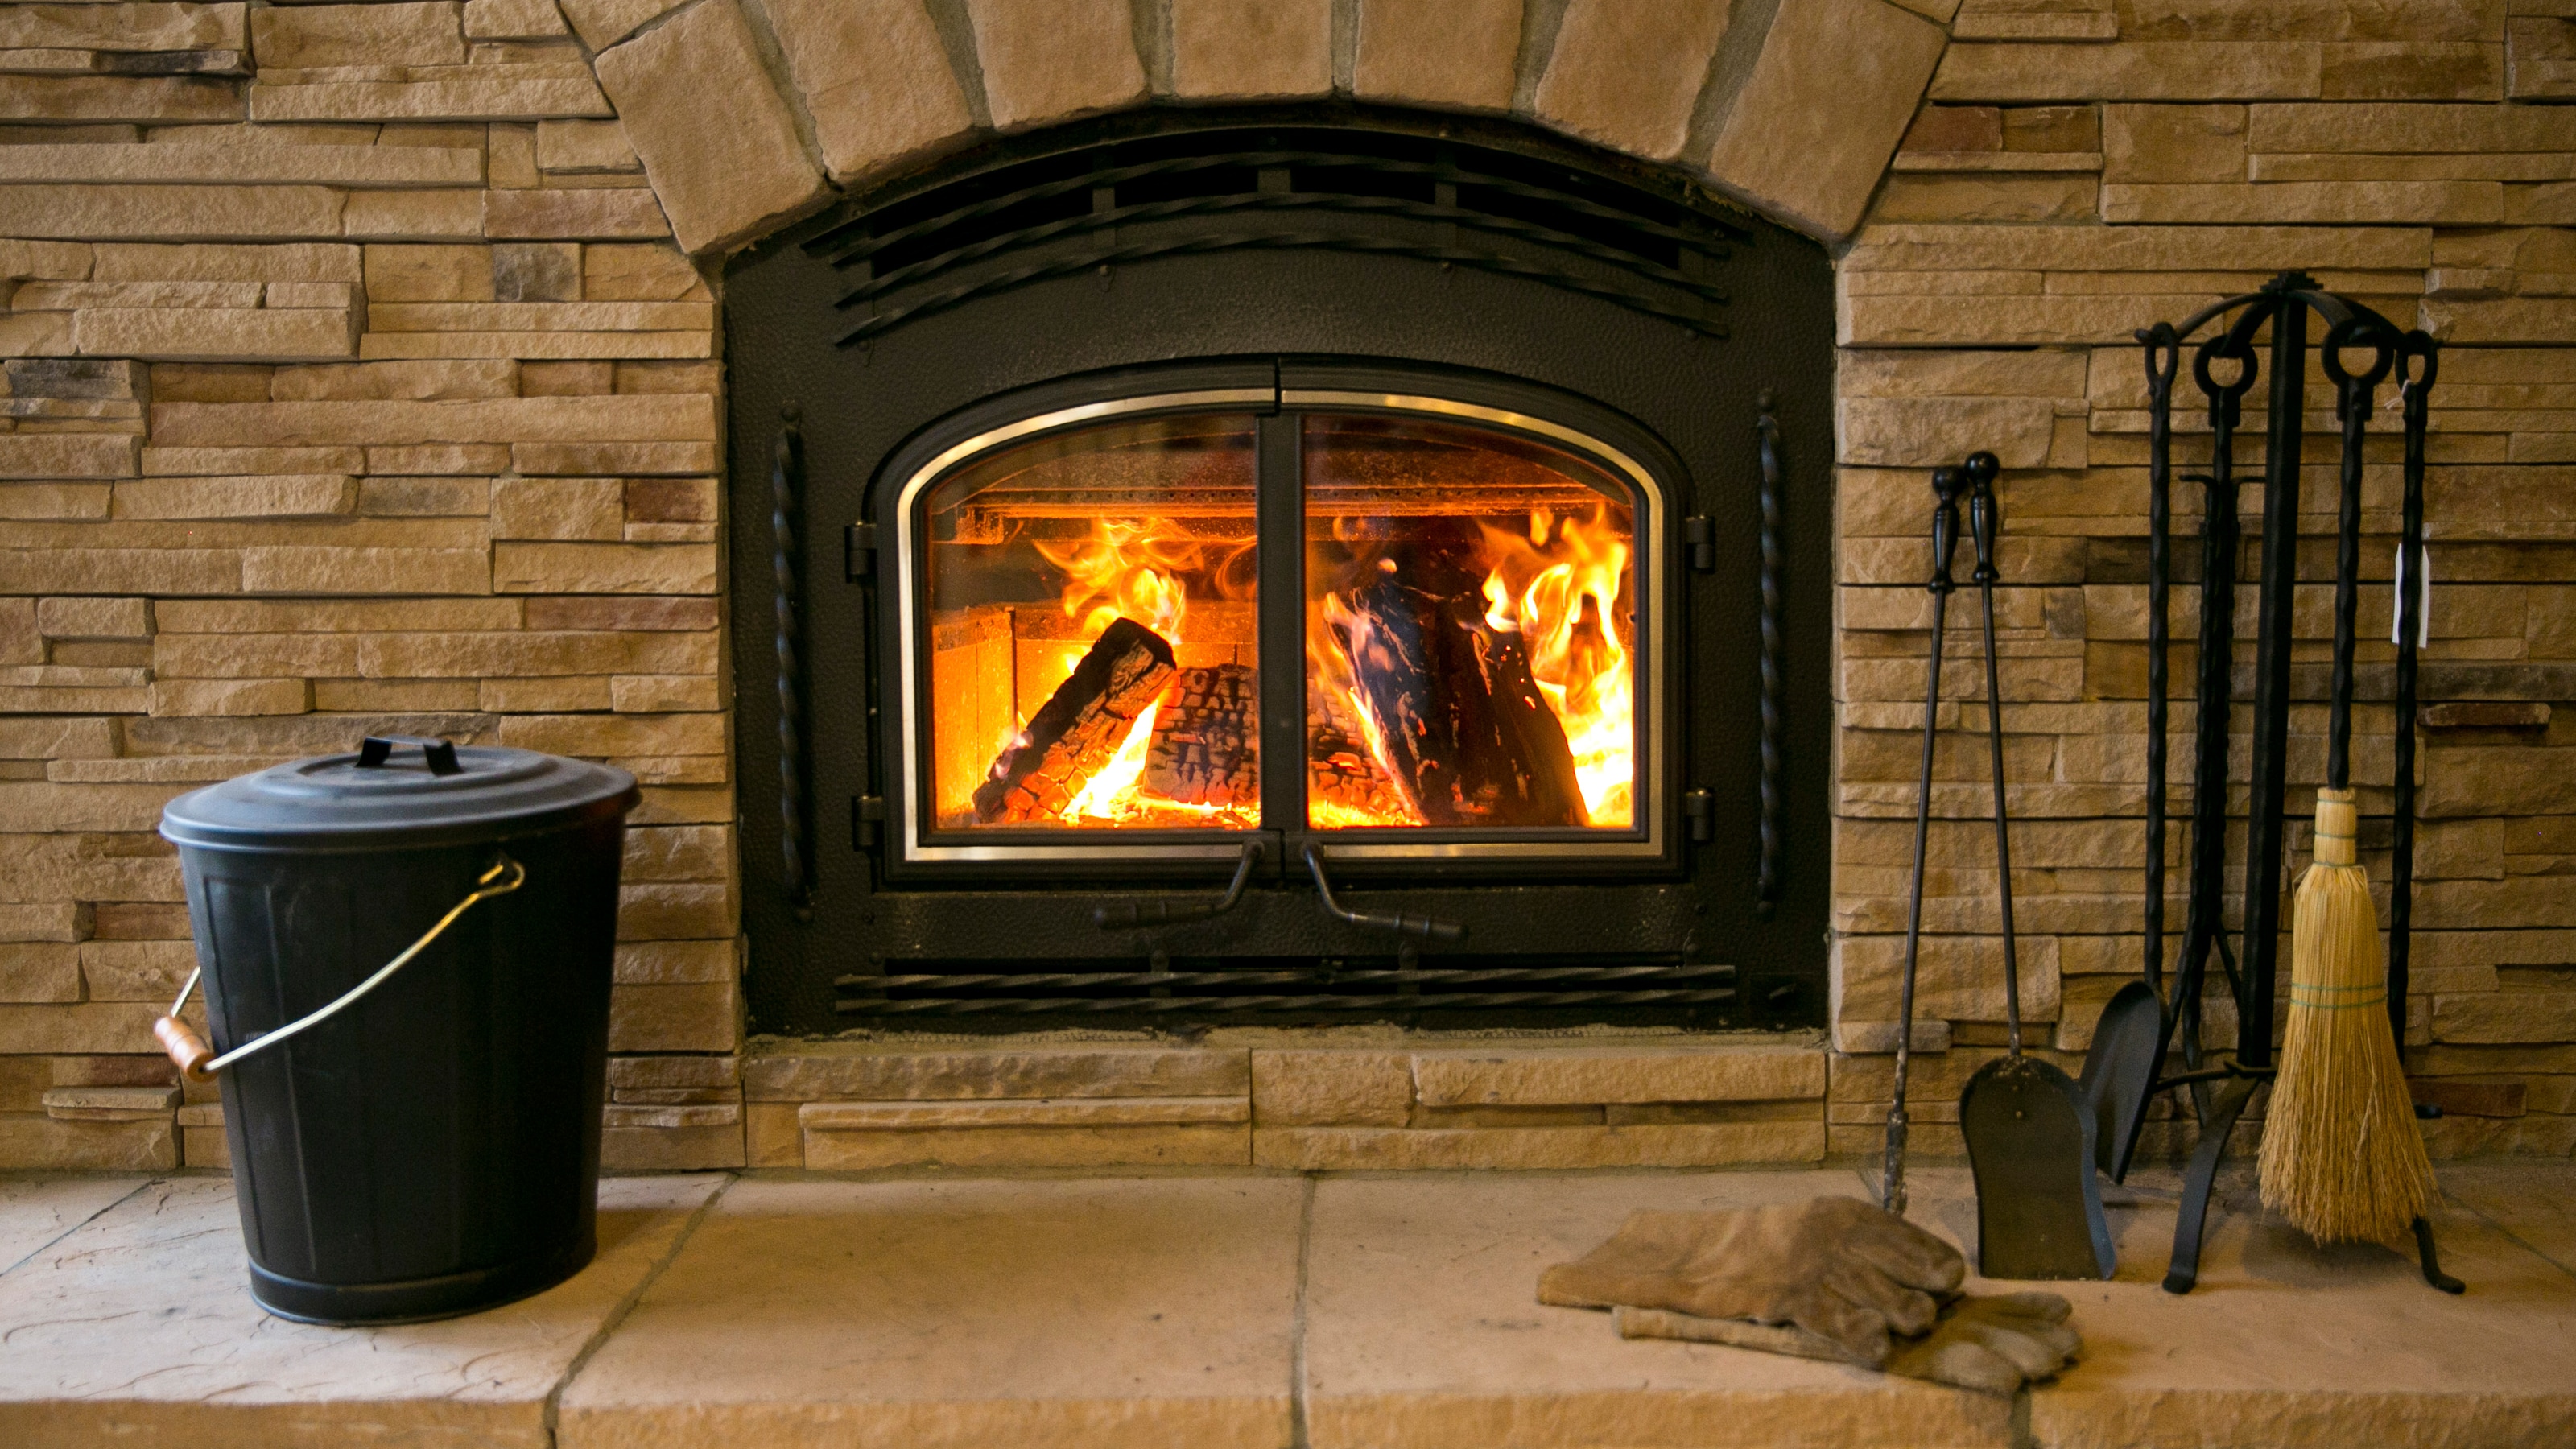 Gas Fireplace Blower Fan Fresh How to Convert A Gas Fireplace to Wood Burning